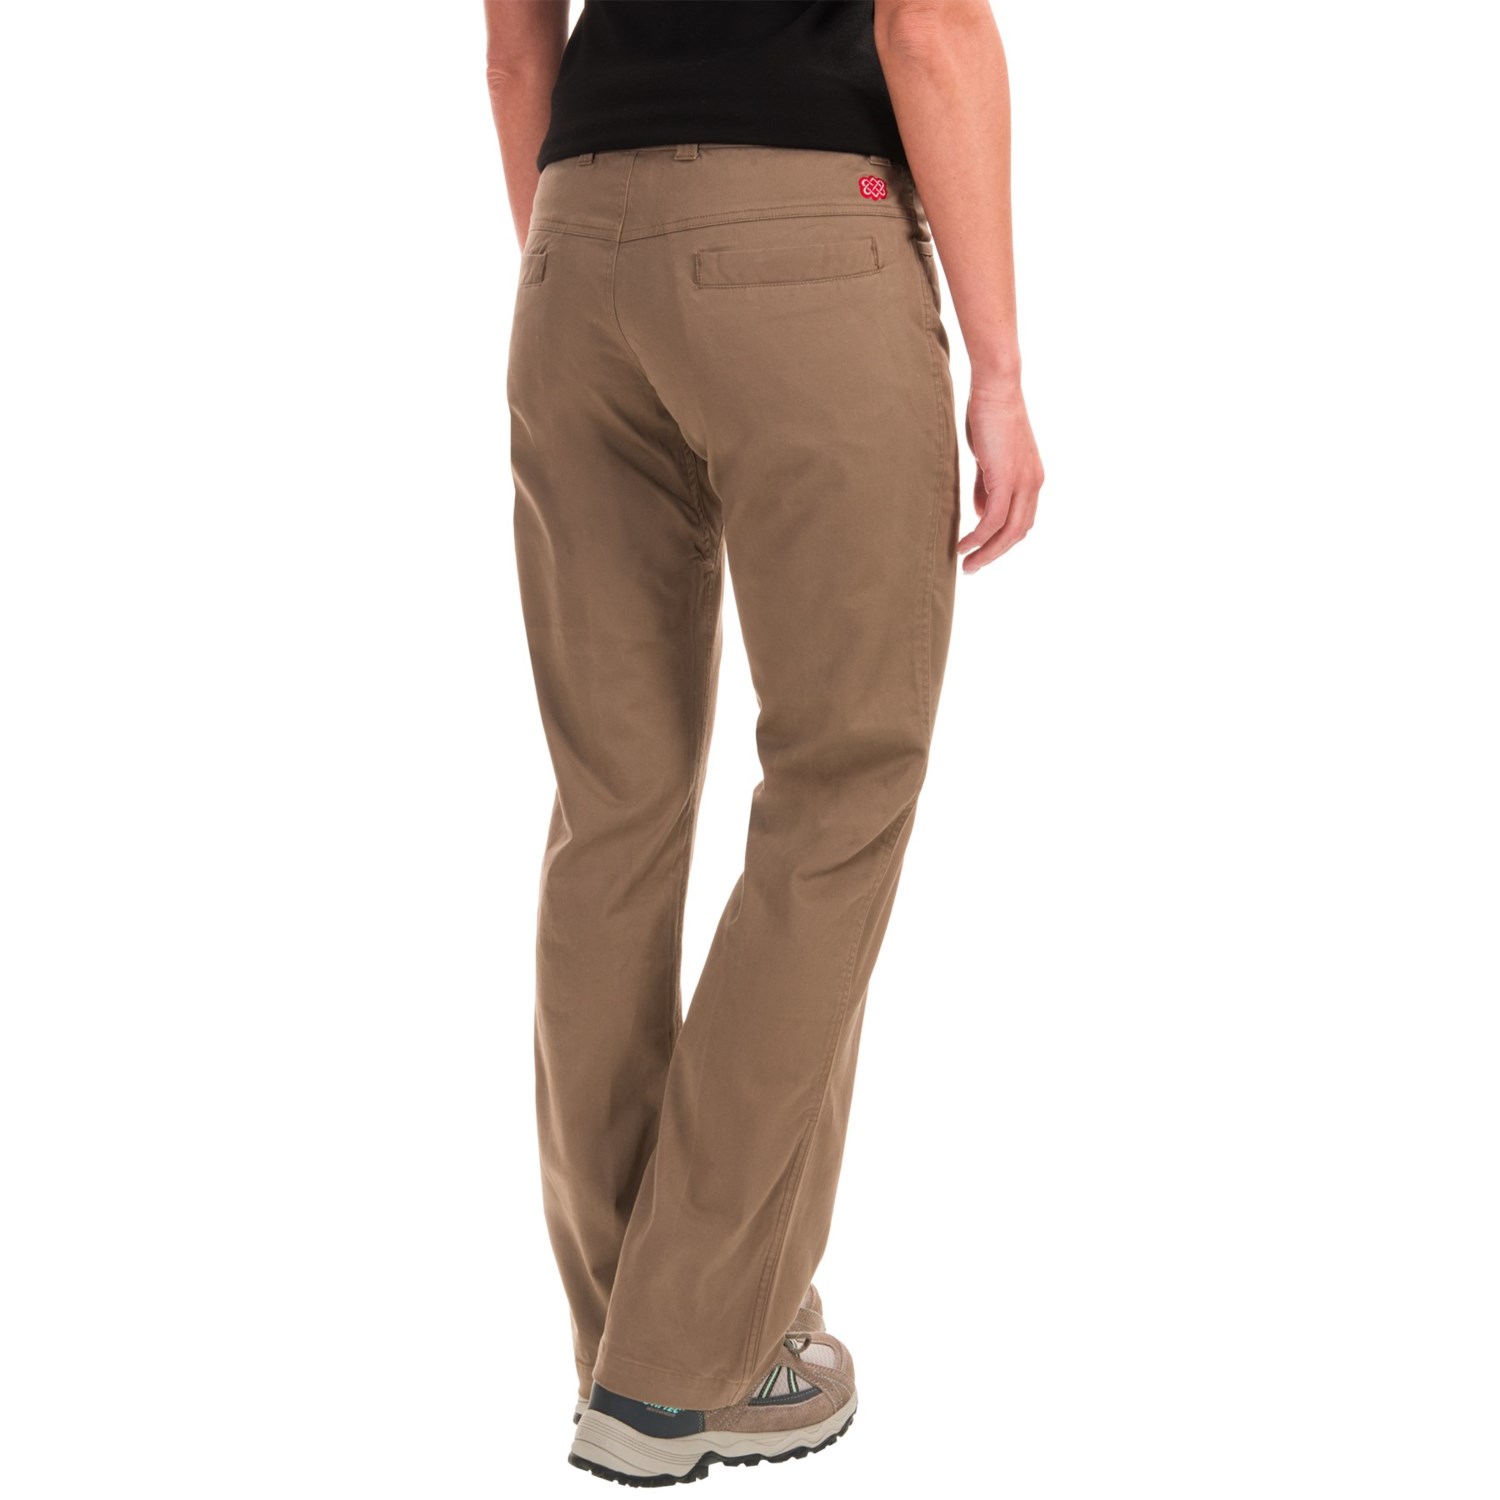 Sherpa Bhima Fitted Pants (For Women) - Save 64%